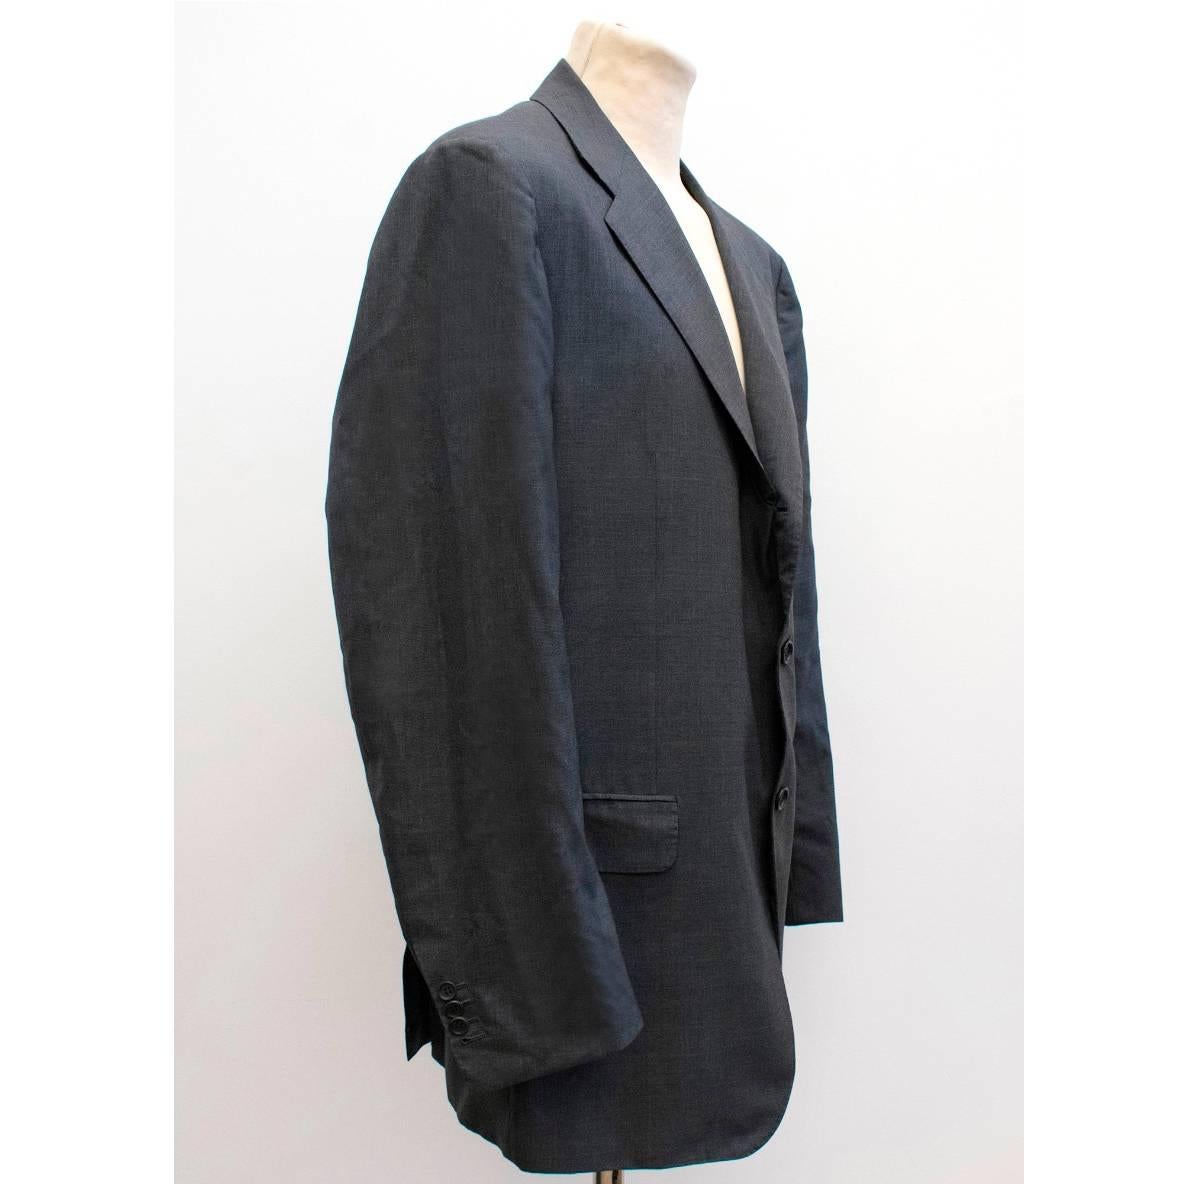 Kiton Wool Check Suit For Sale 2